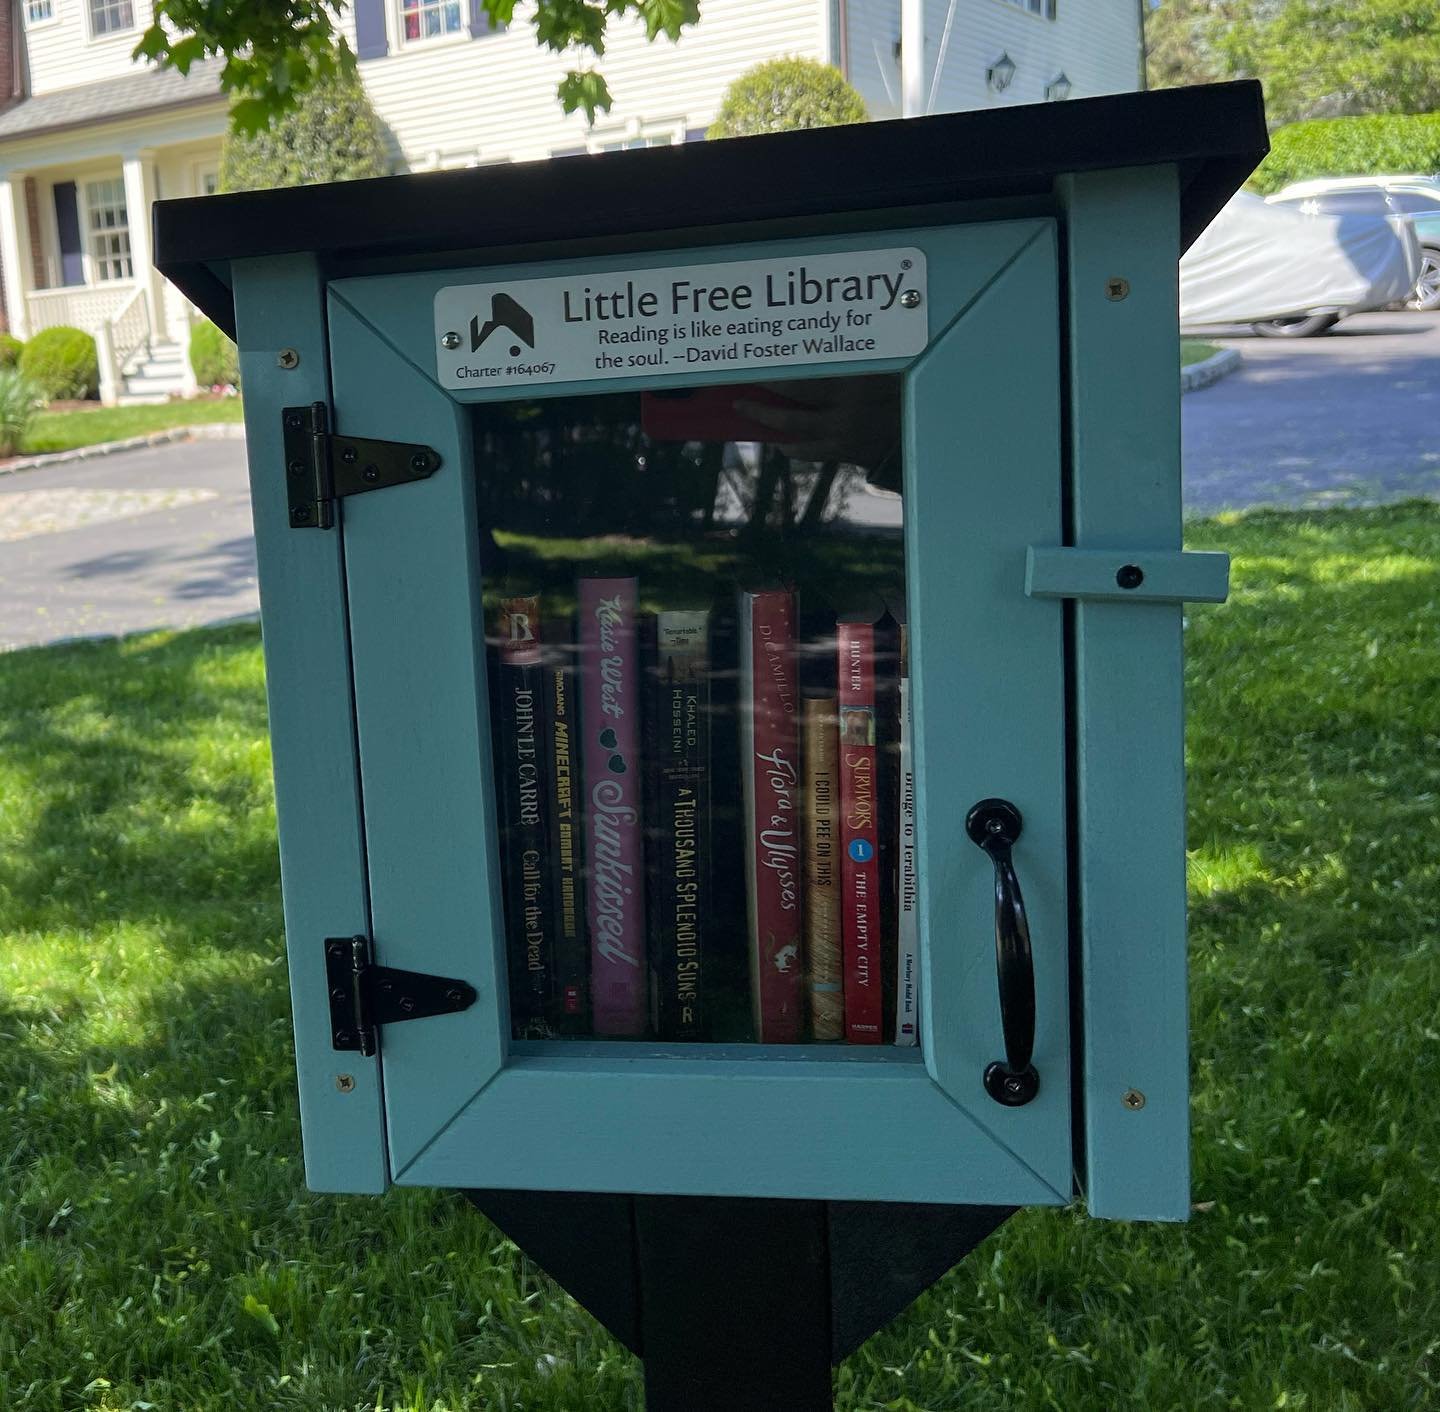 Every time I see a little lending library, I recall some of my earliest memories: Reading in the aisles of the library in Fayetteville, waiting for my grandmother to finish her matron duties. My mom taking me to the library in Morgantown. Spending ev